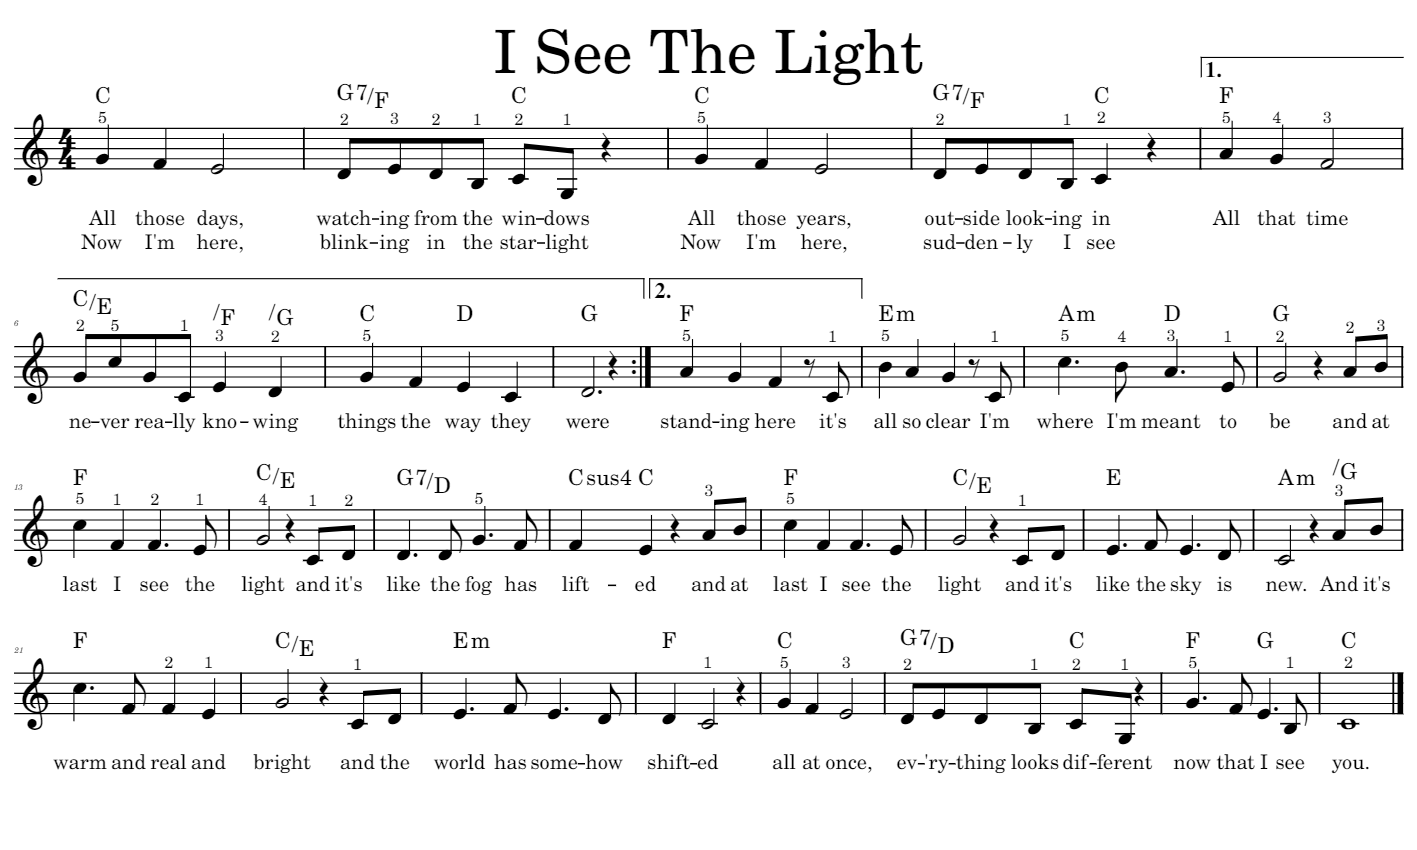 I See The Light - Melody